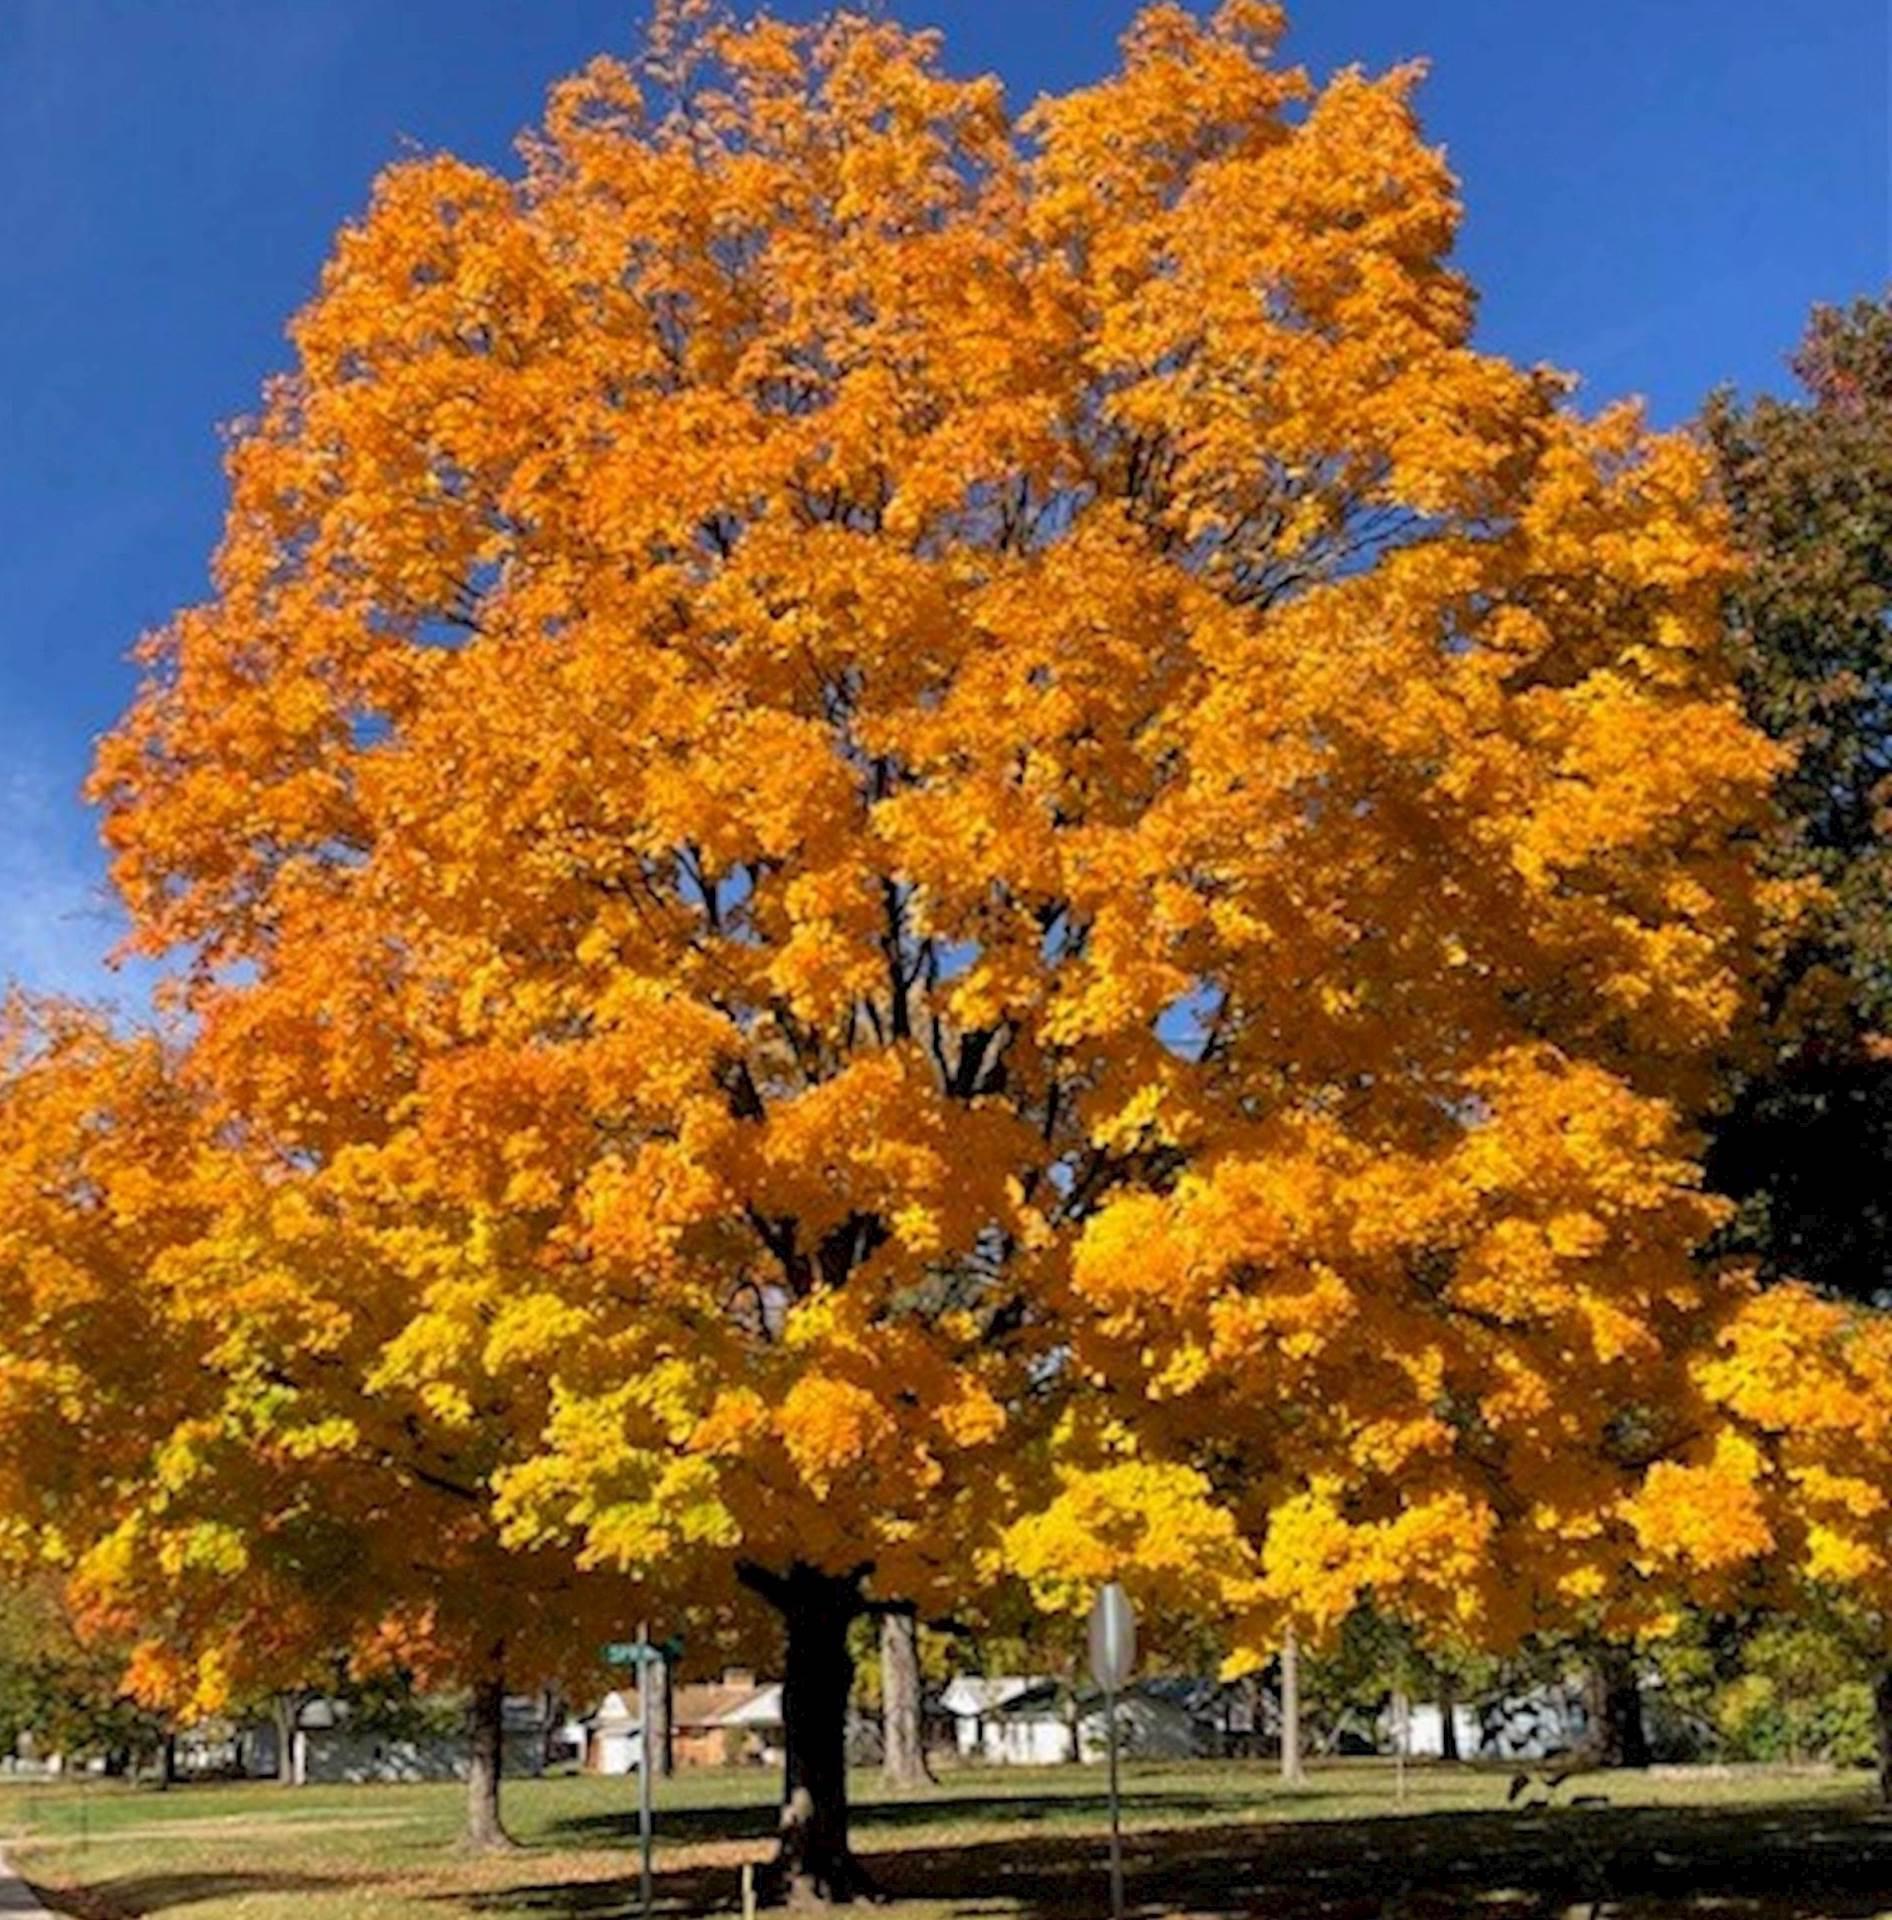 Photo of a large sugar maple tree in the fall with yellow and orange leaves